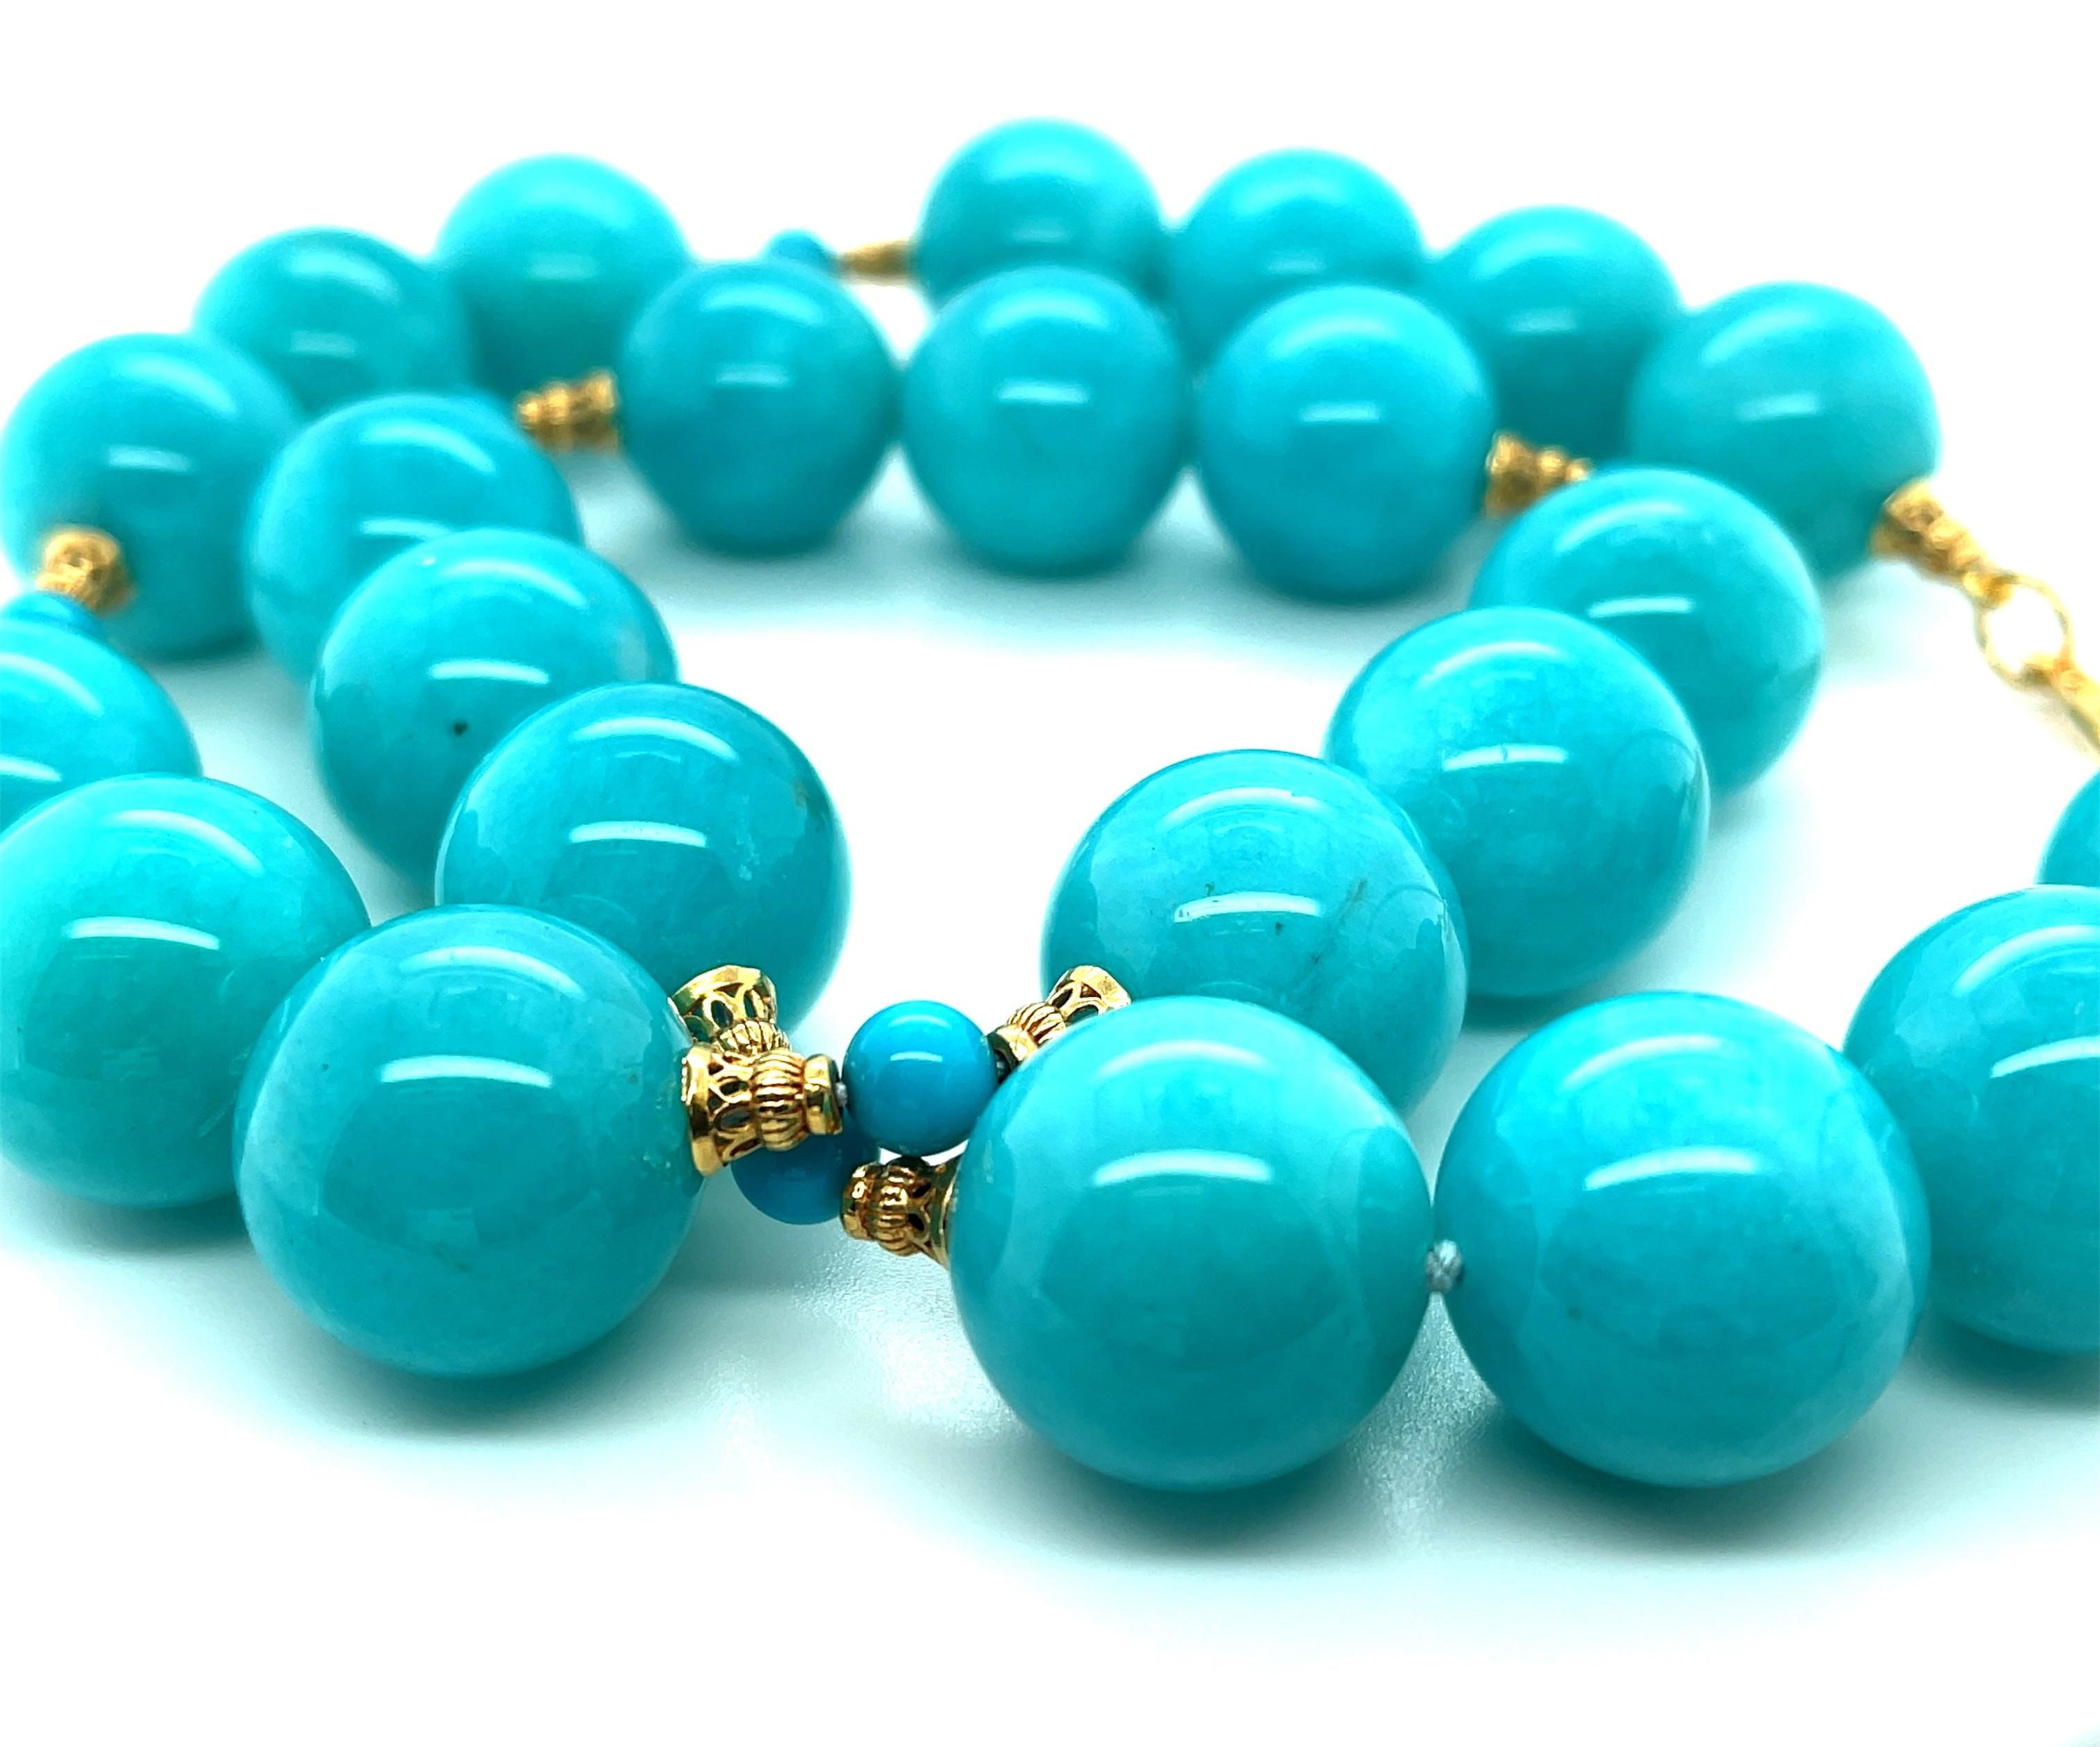 This stunning statement necklace features a beautiful collection of perfectly matched, 18mm round amazonite beads with vibrant, gorgeous color! The large amazonite beads are paired with smaller turquoise beads and decorative 18k yellow gold